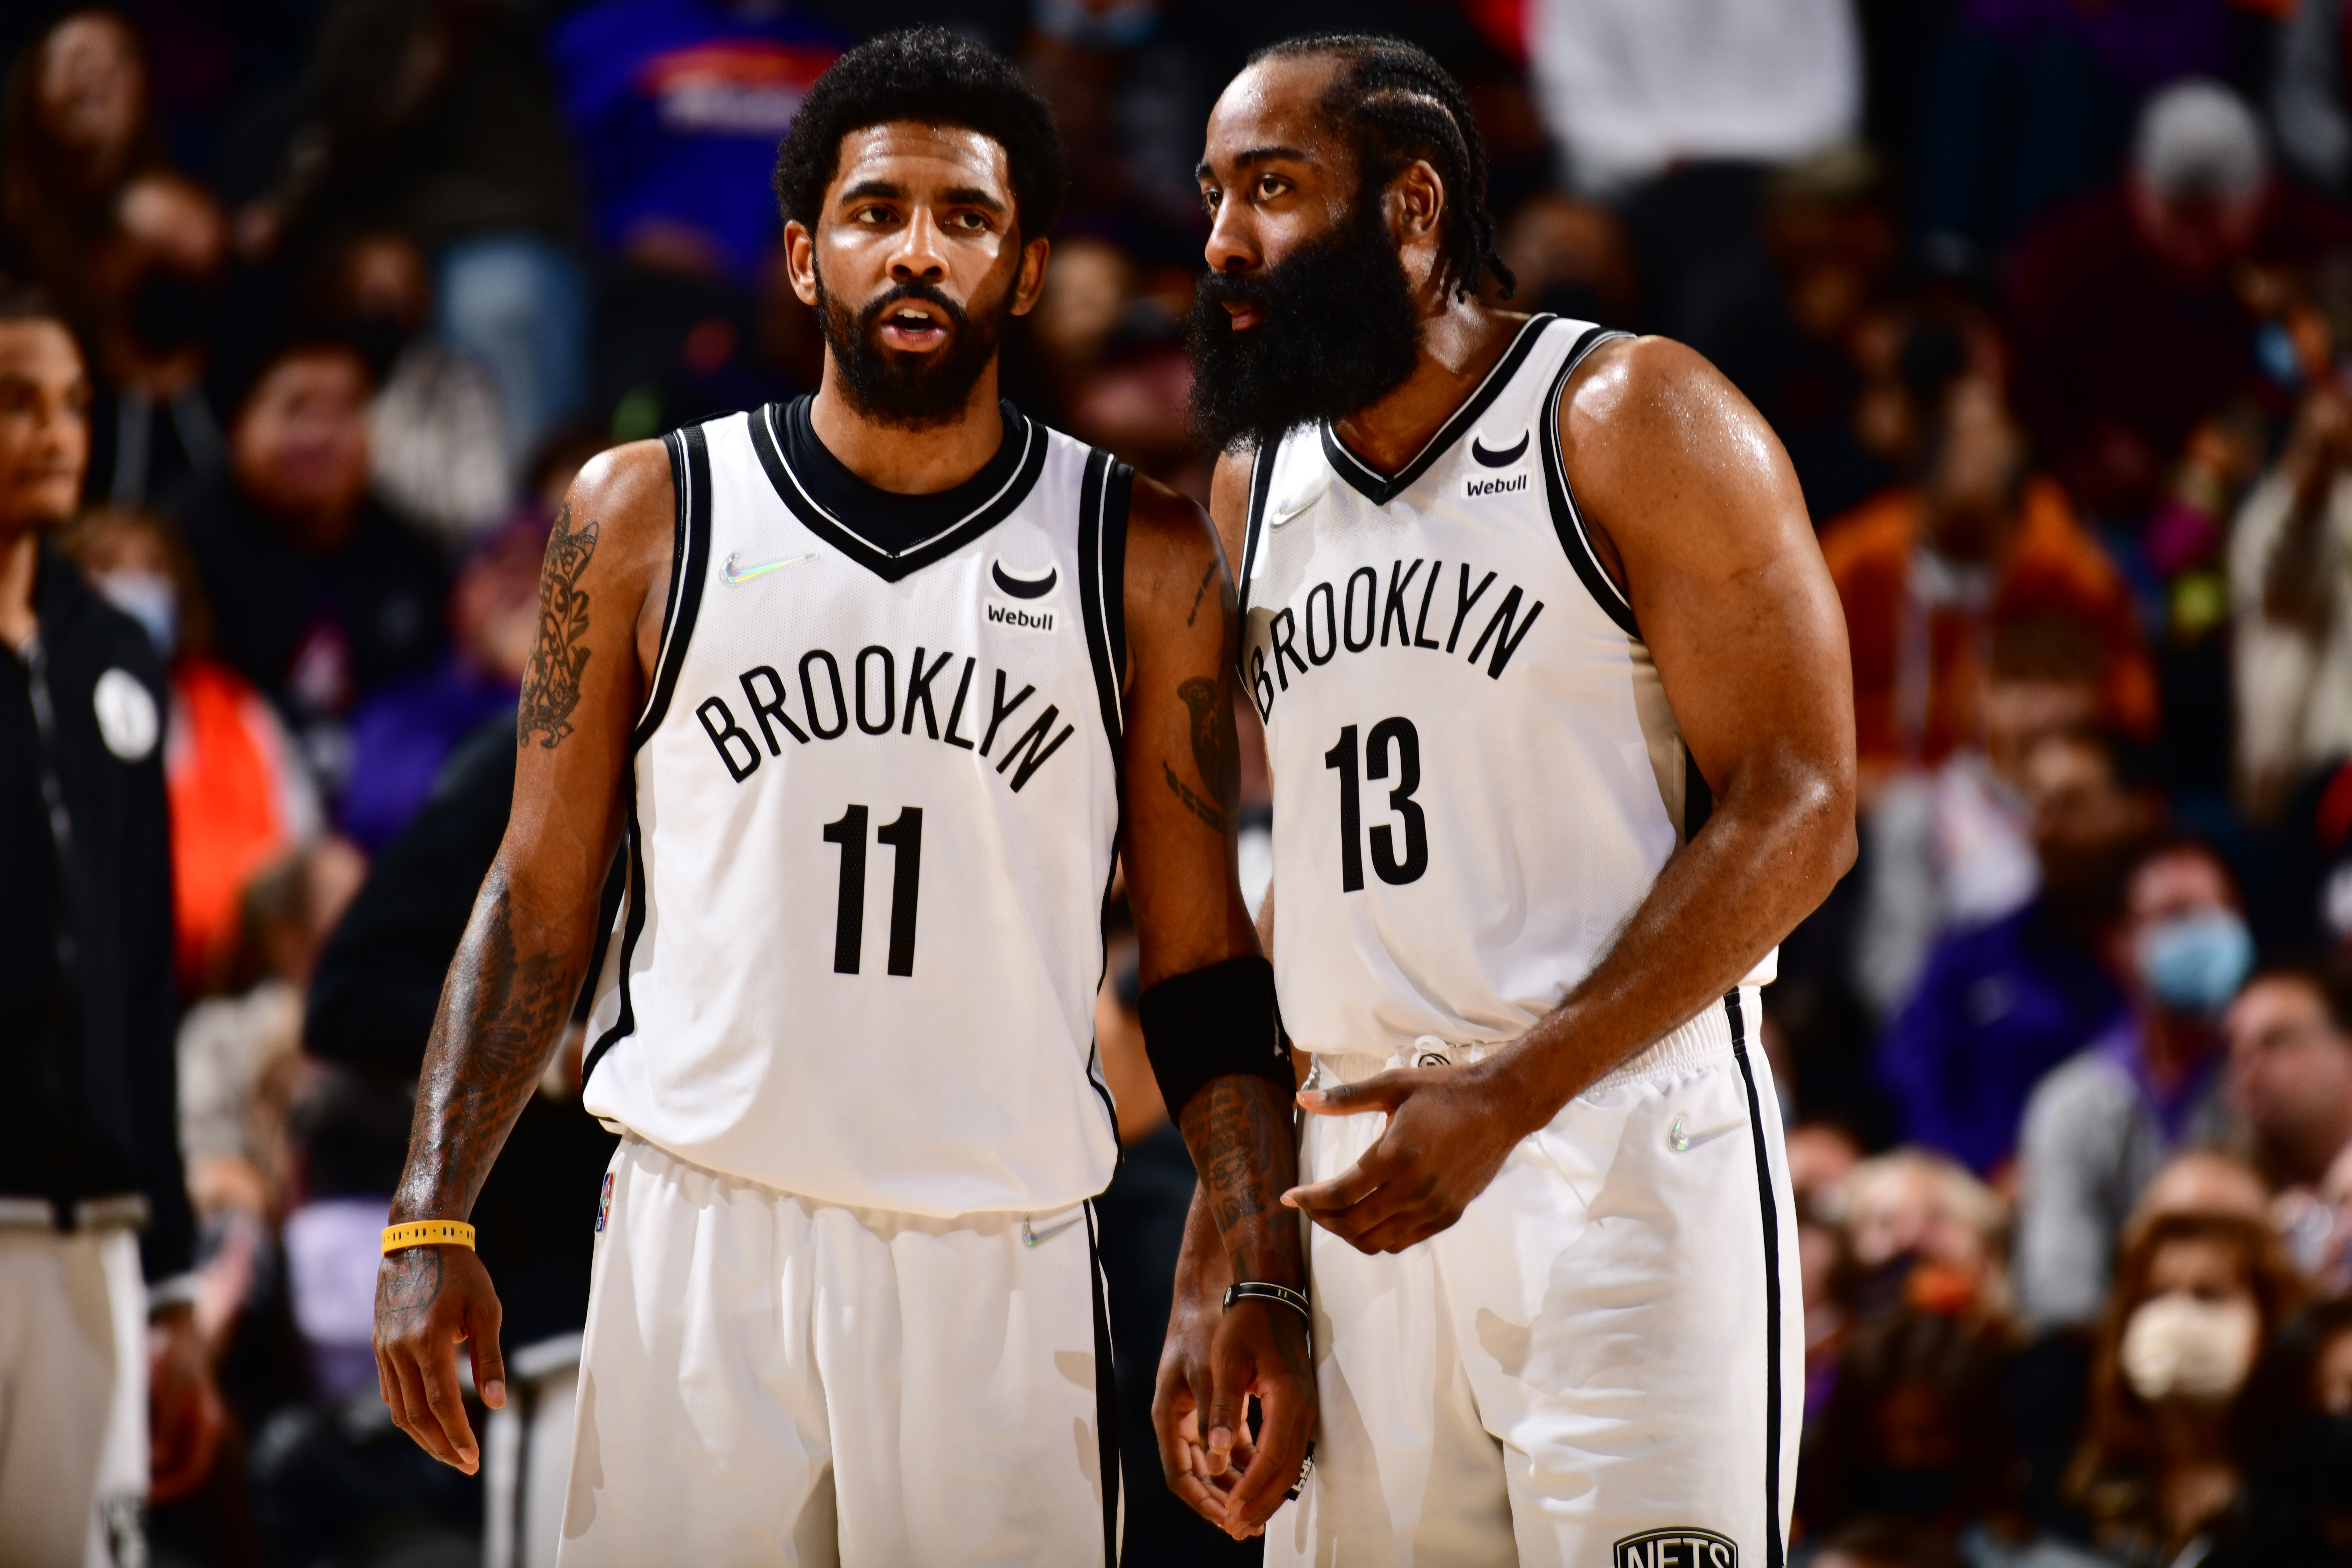 NBA Rumors: James Harden 'Frustrated with Nets', Not Kyrie Irving specifically thumbnail